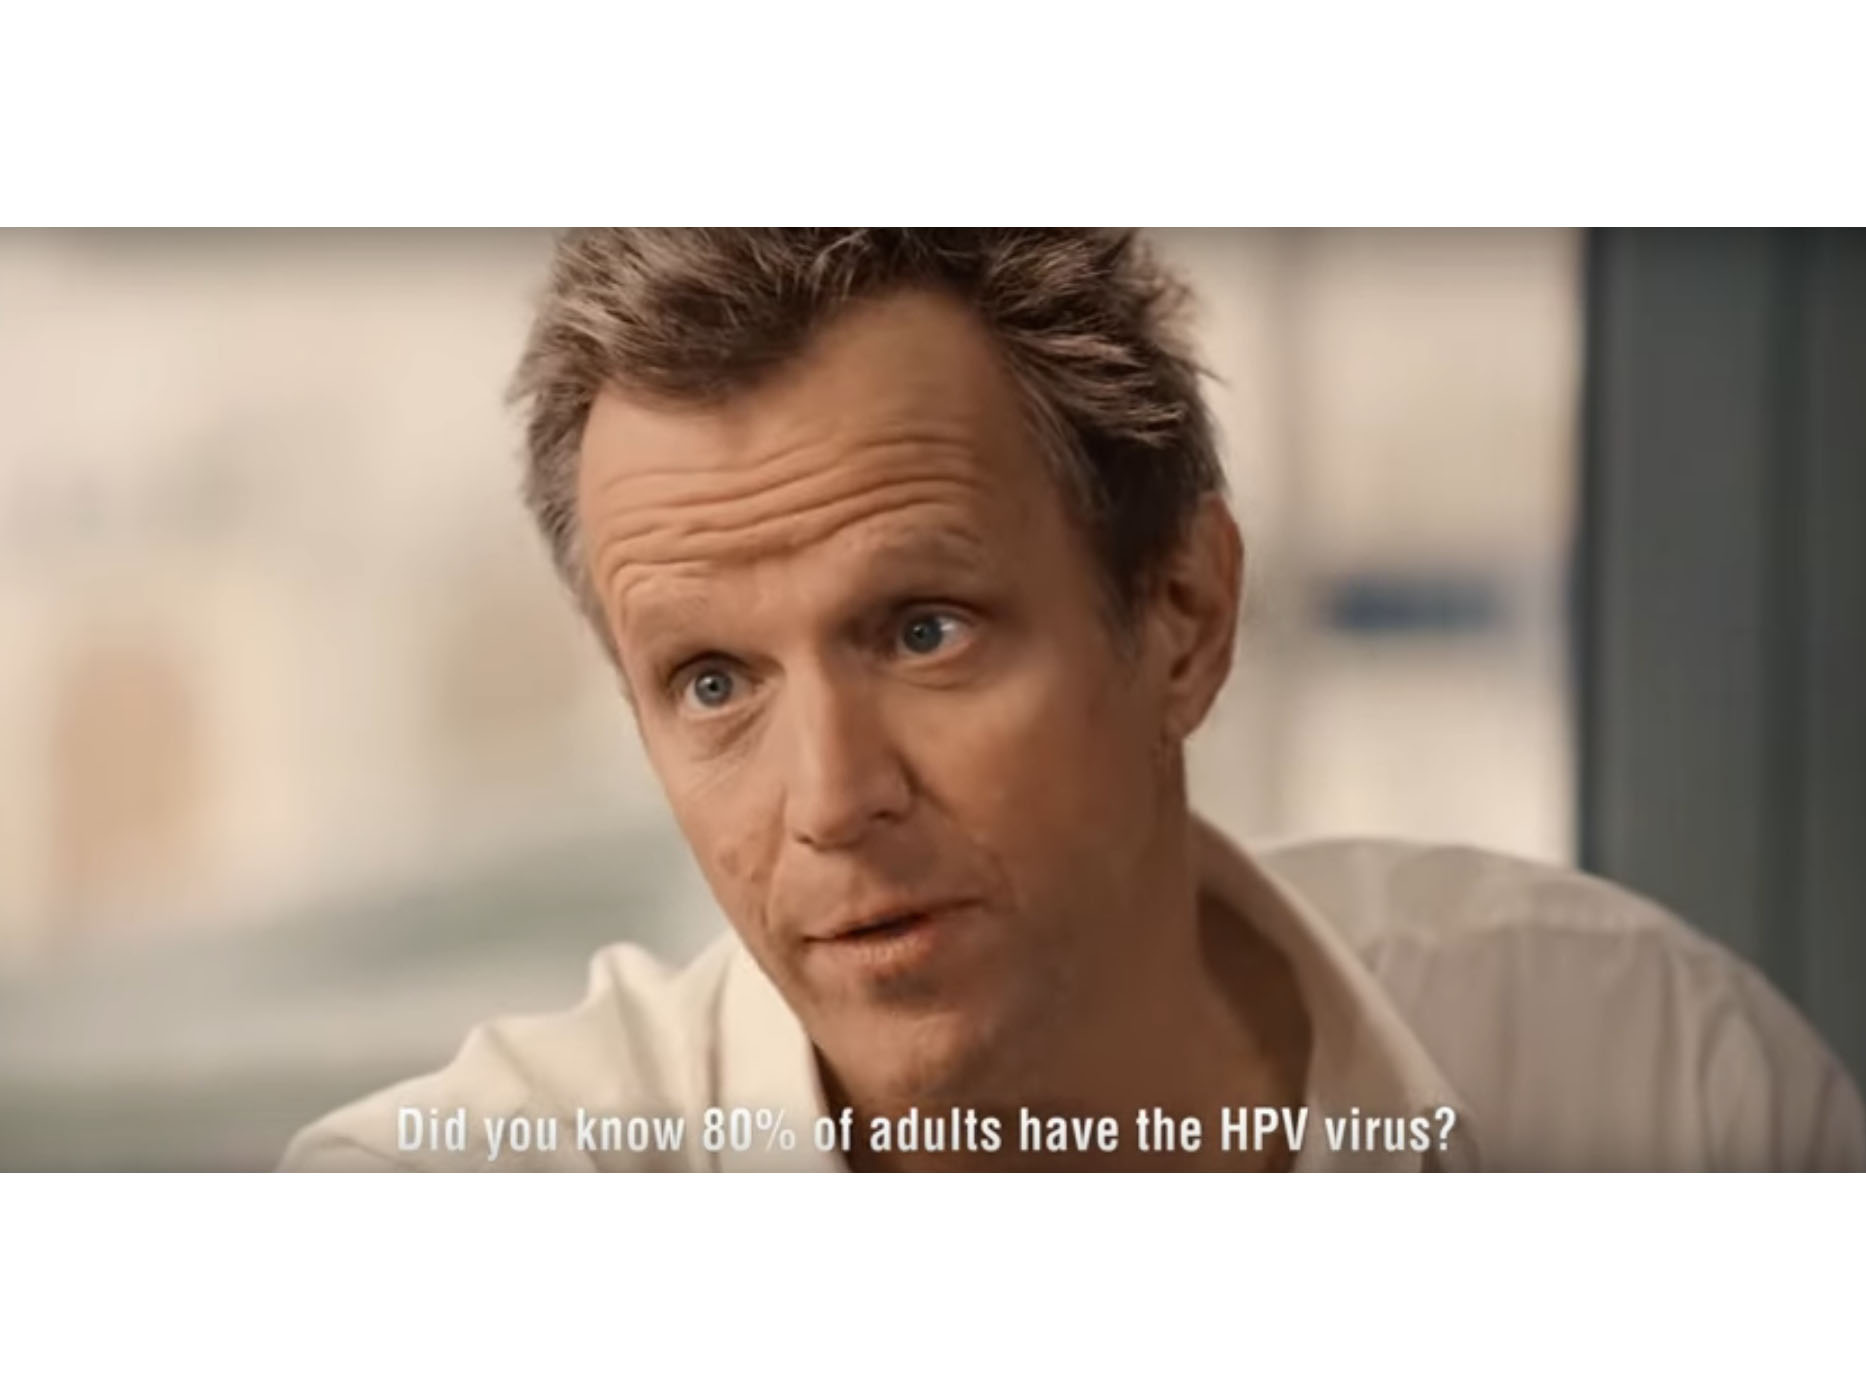 Publicis Groupe’s annual wishes film puts the spotlight on HPV-related cancer